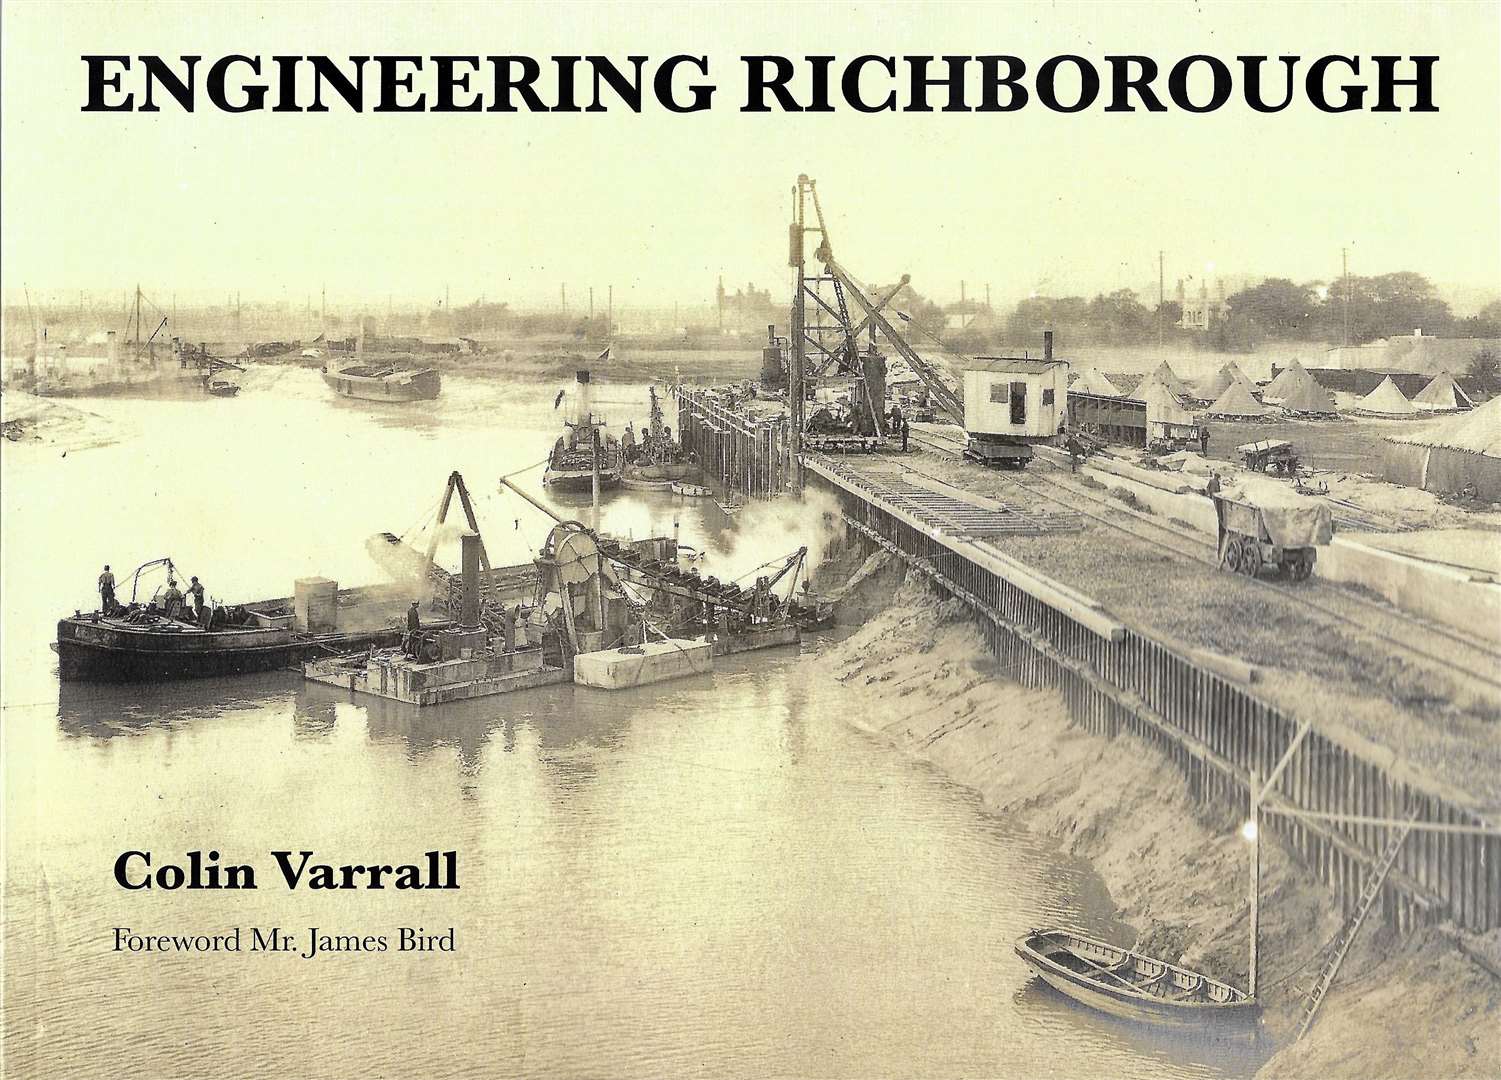 Engineering Richborough by Colin Varrall